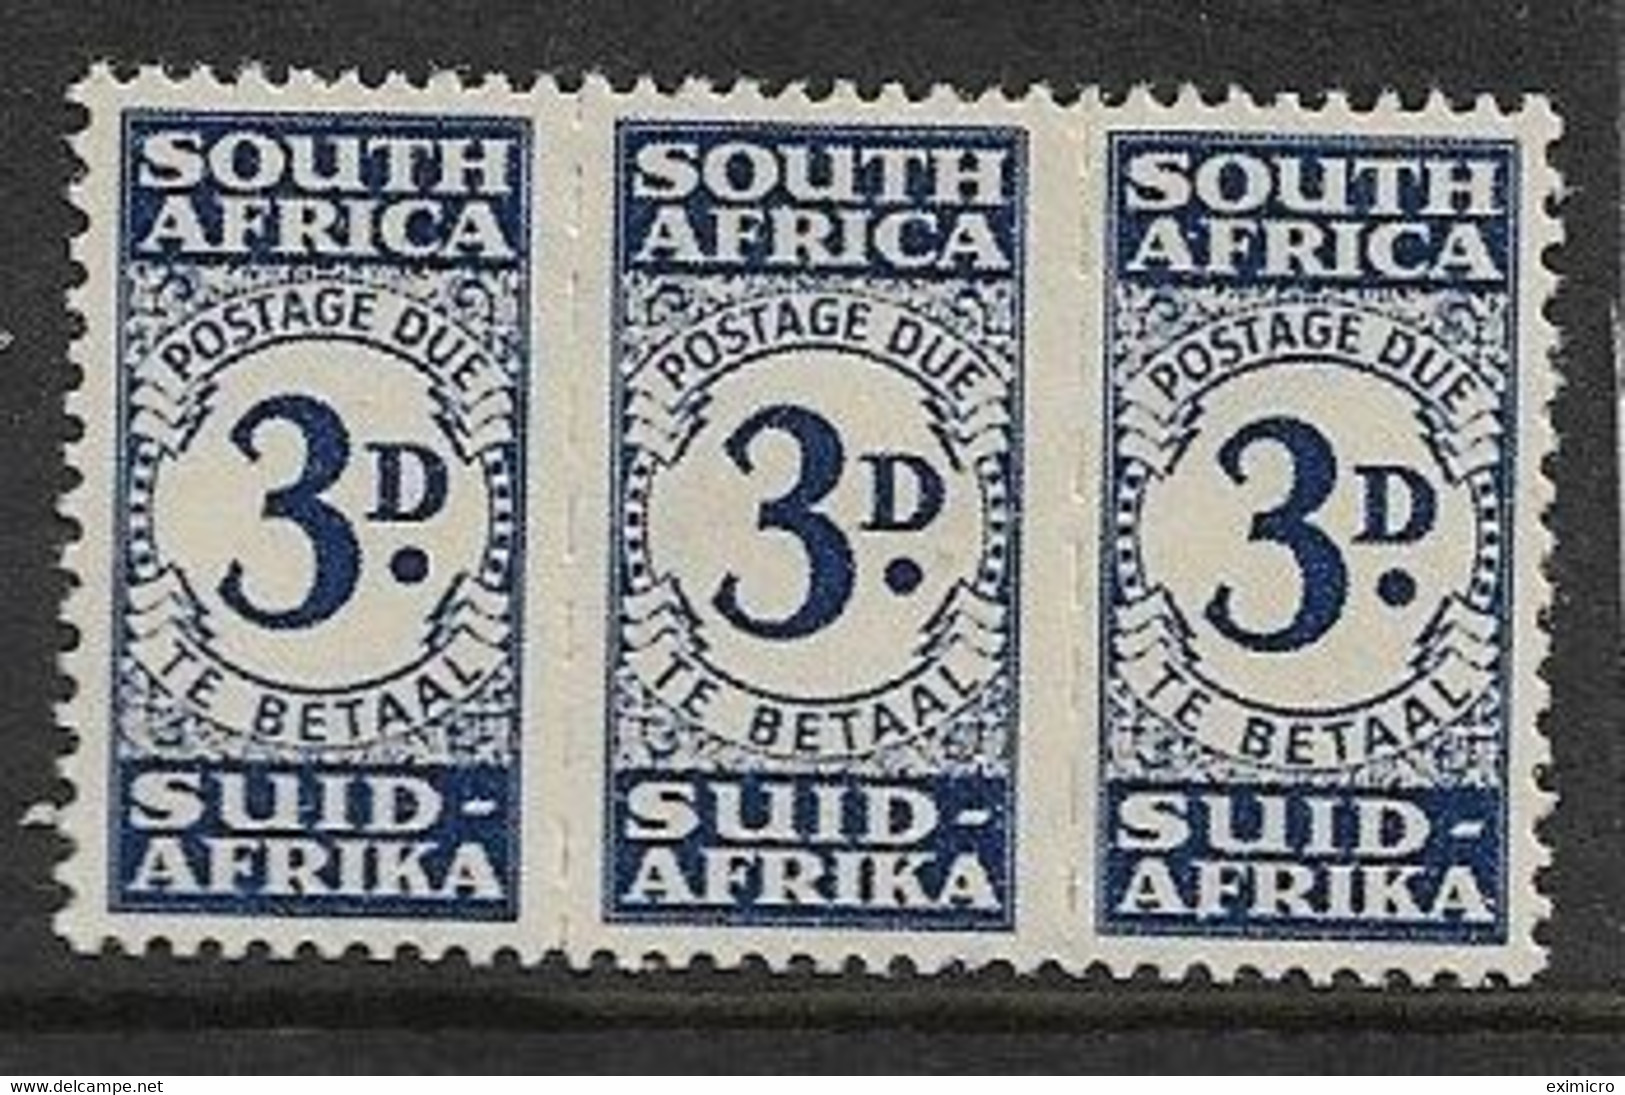 SOUTH AFRICA 1943 - 1944 3d POSTAGE DUE SG D33 MOUNTED MINT TOP VALUE OF THE SET Cat £75 - Postage Due